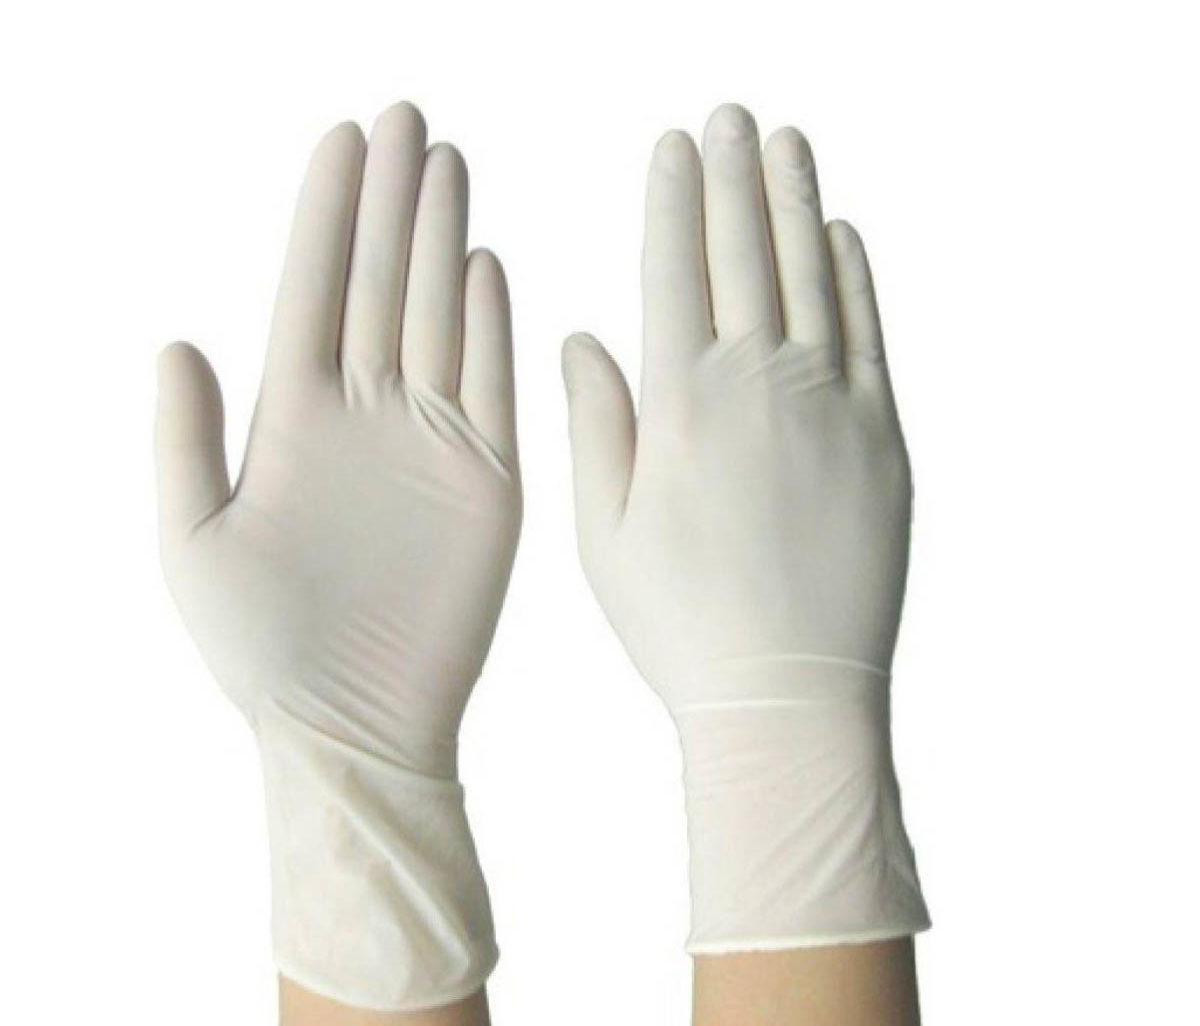 Sugical-Gloves